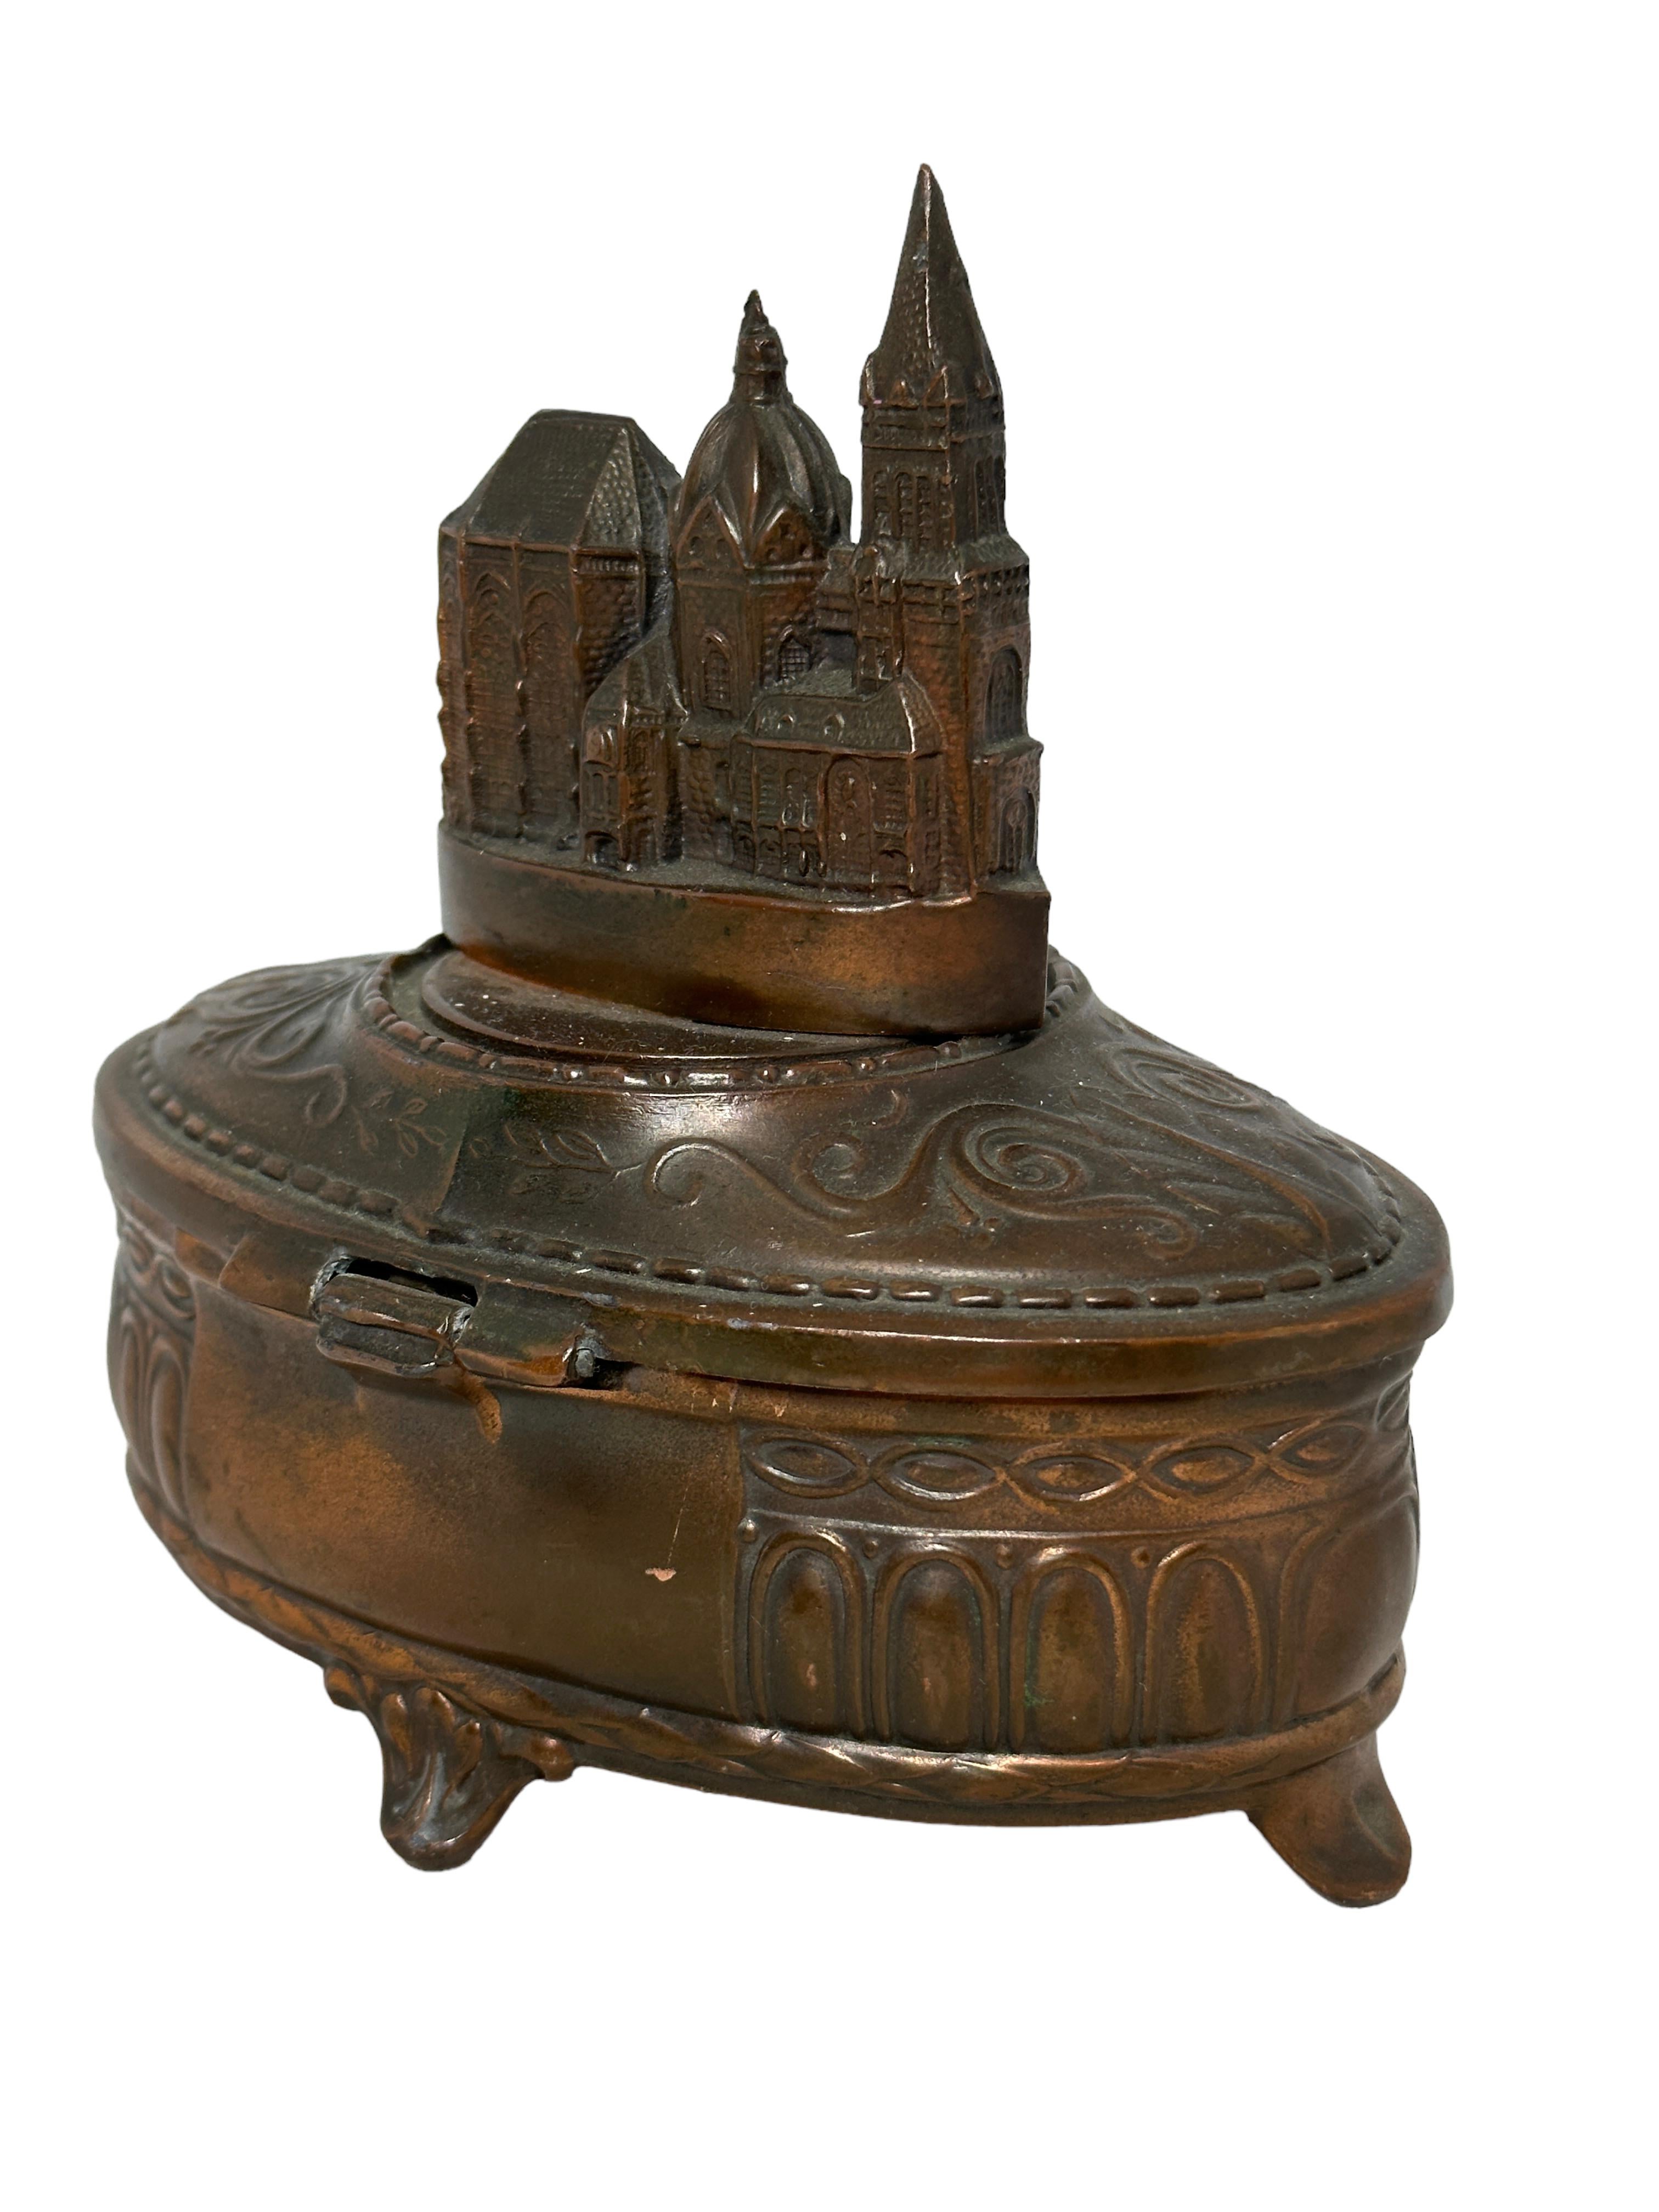 Mid-20th Century Gorgeous Cathedral Aachen Souvenir Trinket Jewelry Box Antique, German, 1950s